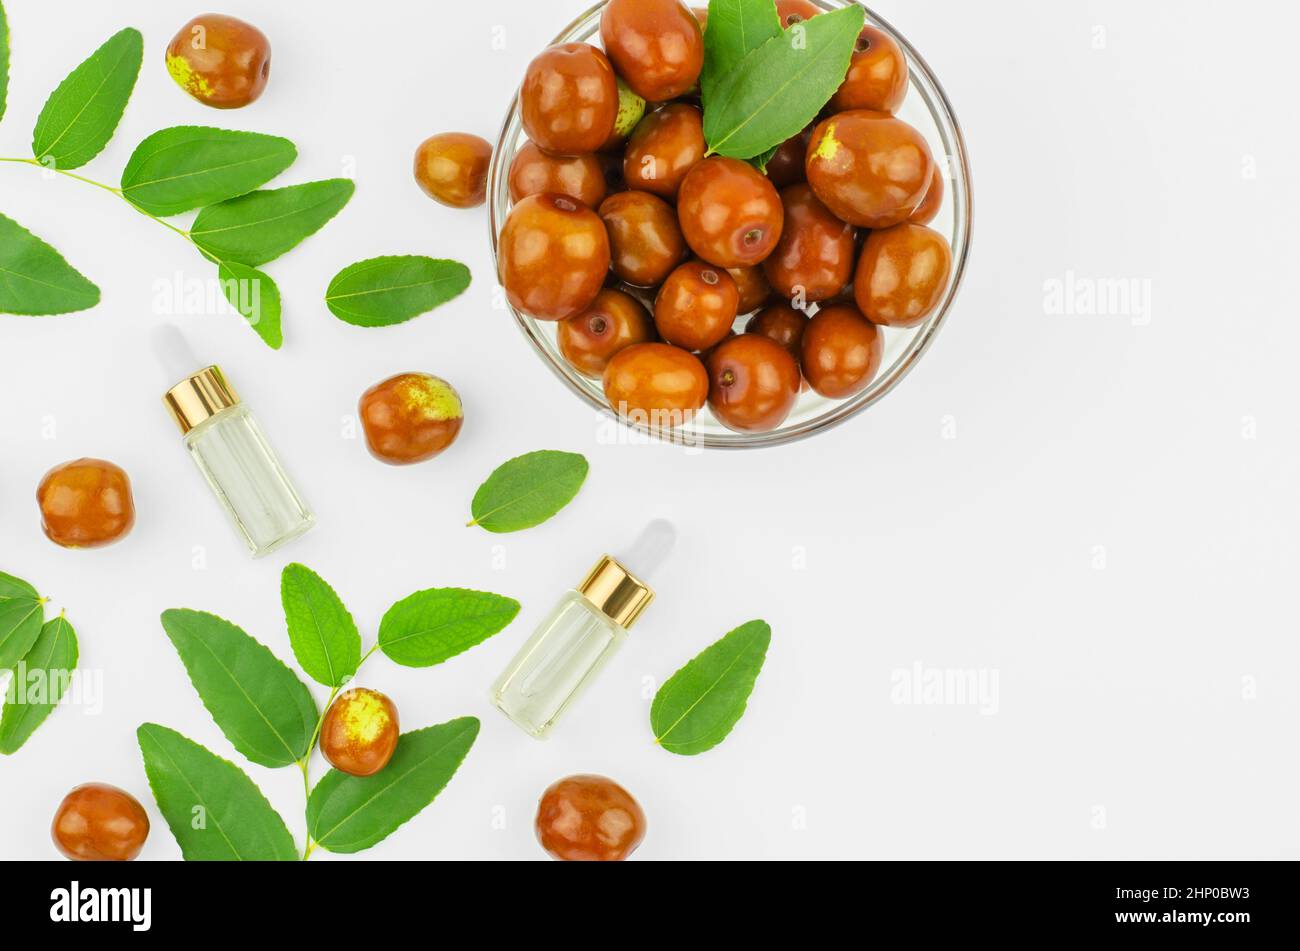 Chinese date oil and fruits, copy space. Jojoba oil in bottles with a dropper on a background with ripe jojoba fruits and green leaves. Stock Photo